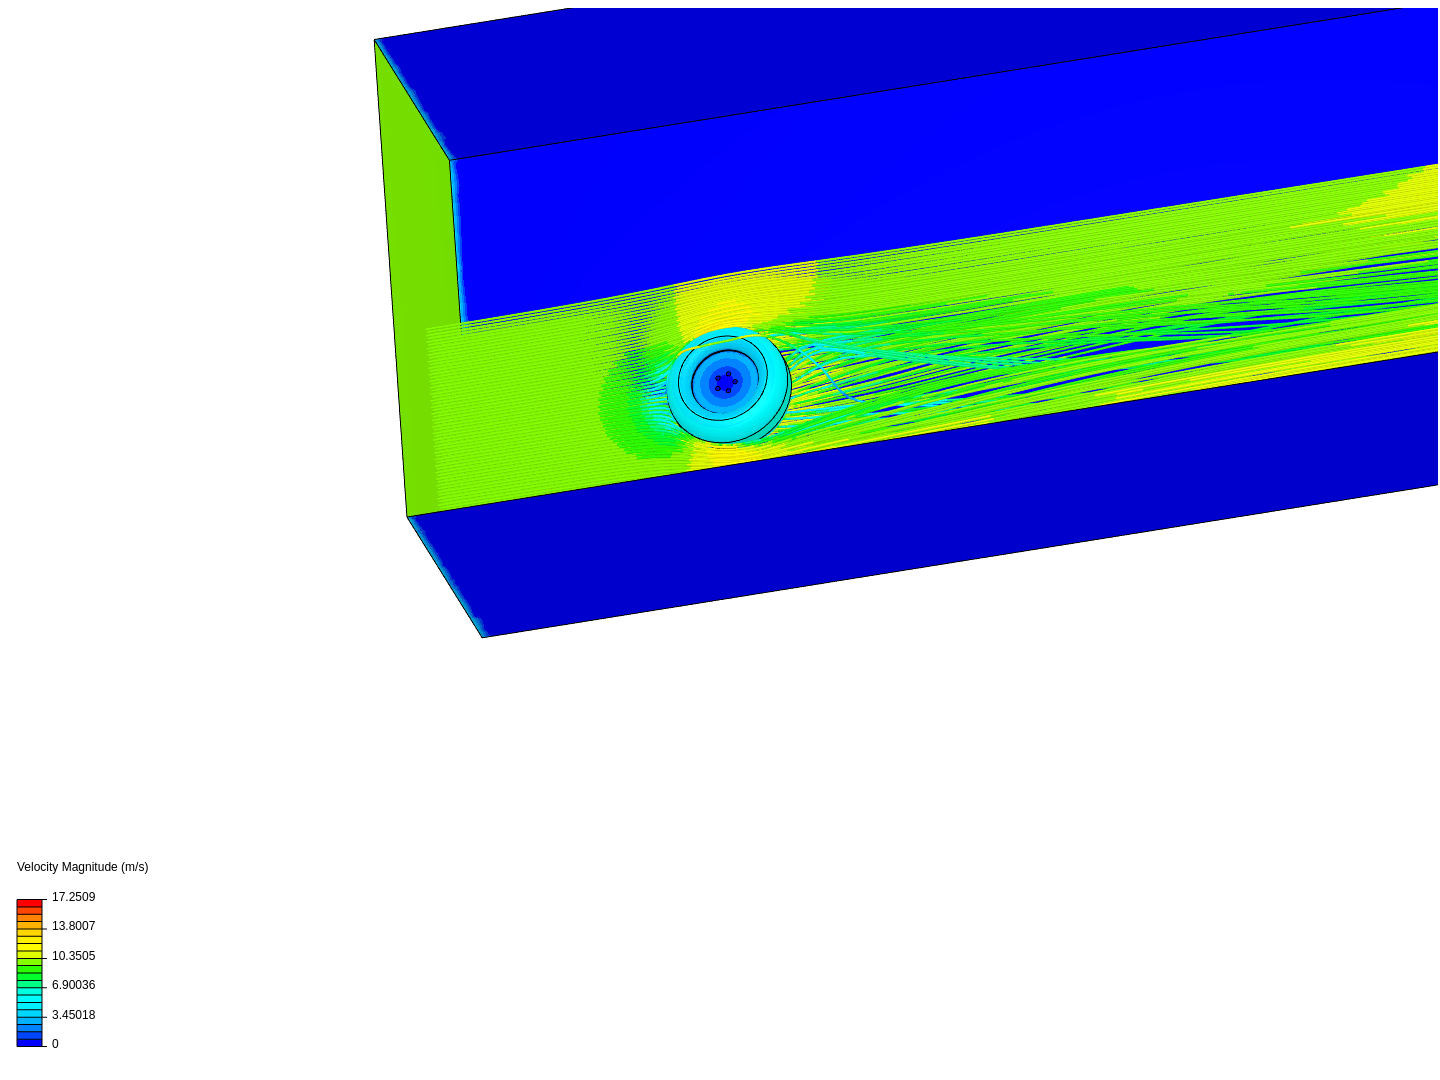 tire cfd 2 image